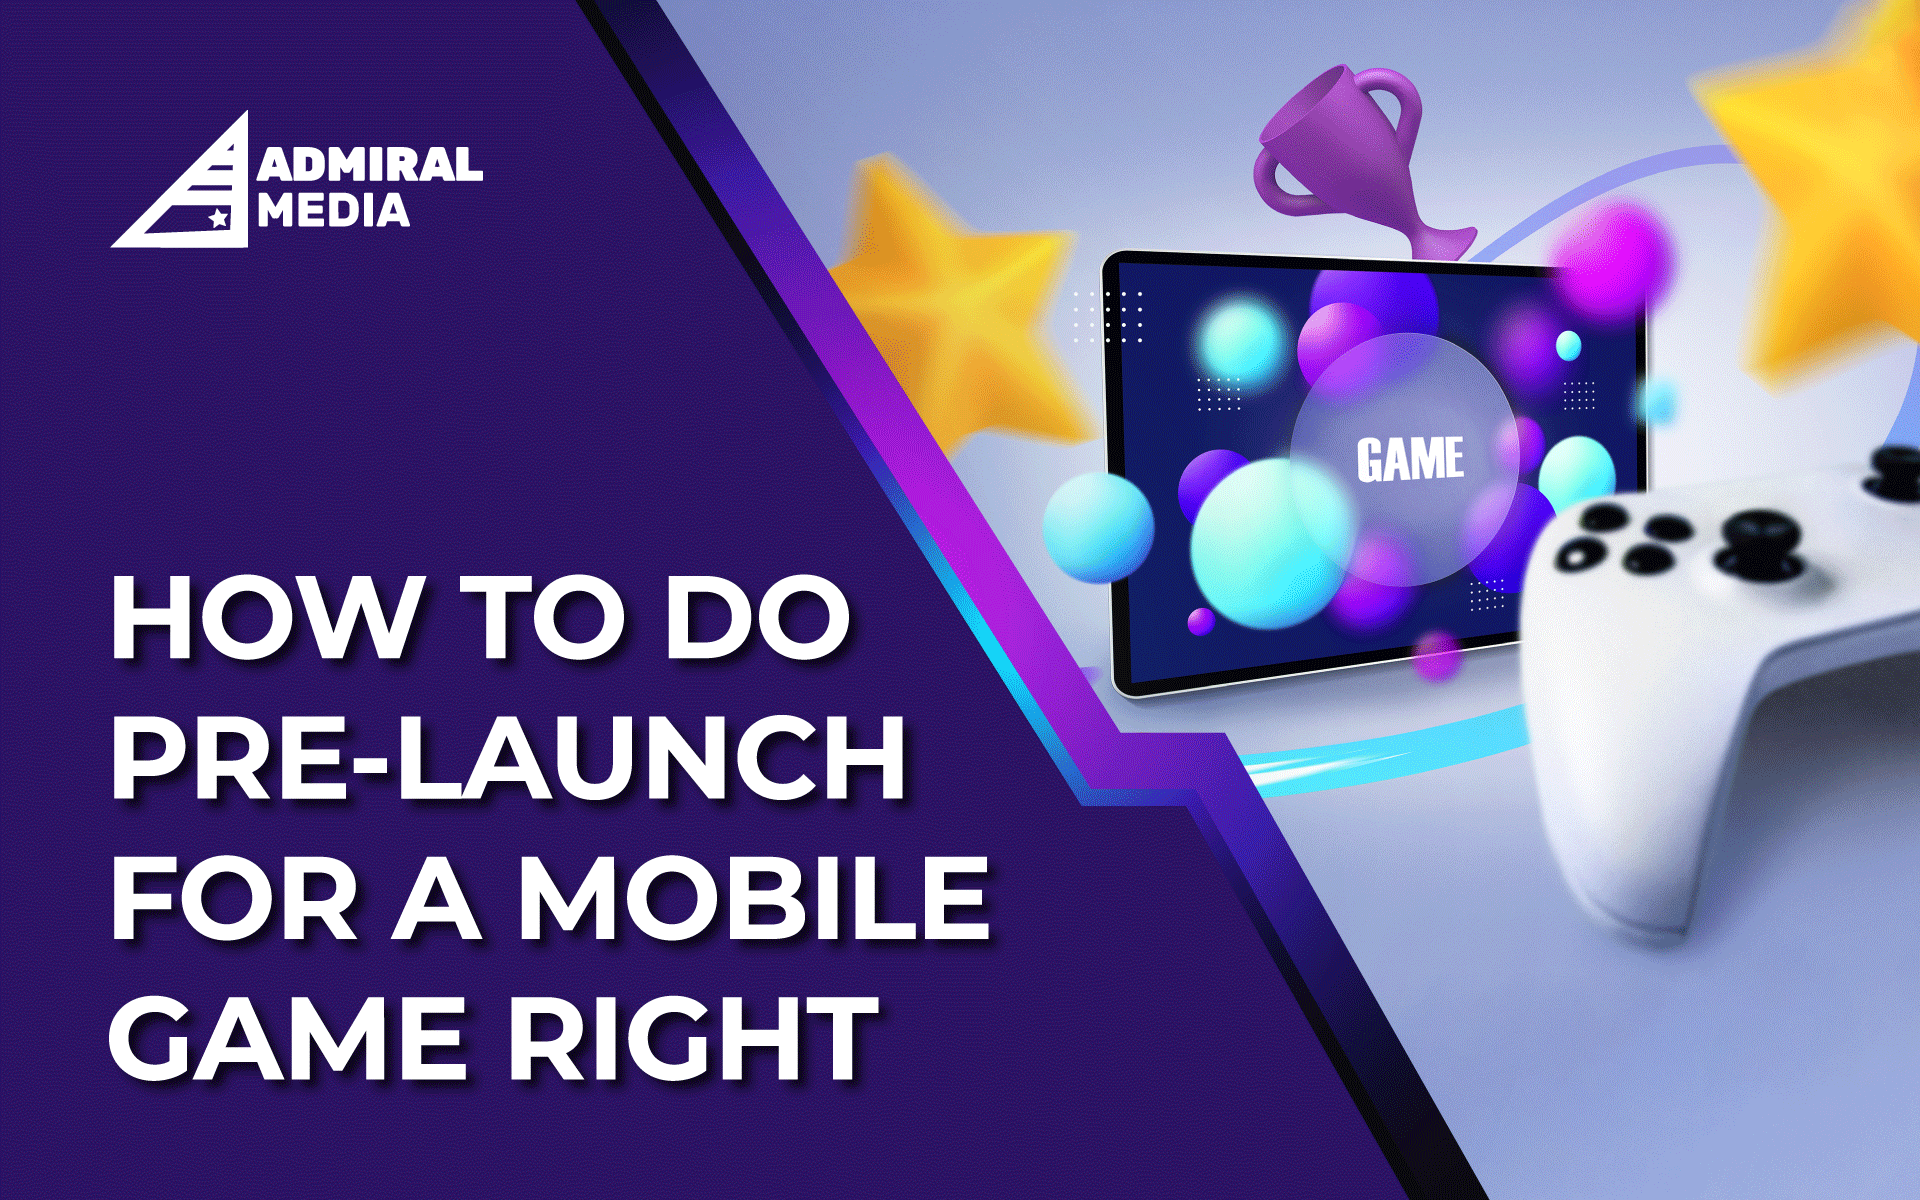 How to do pre-launch for a mobile game right